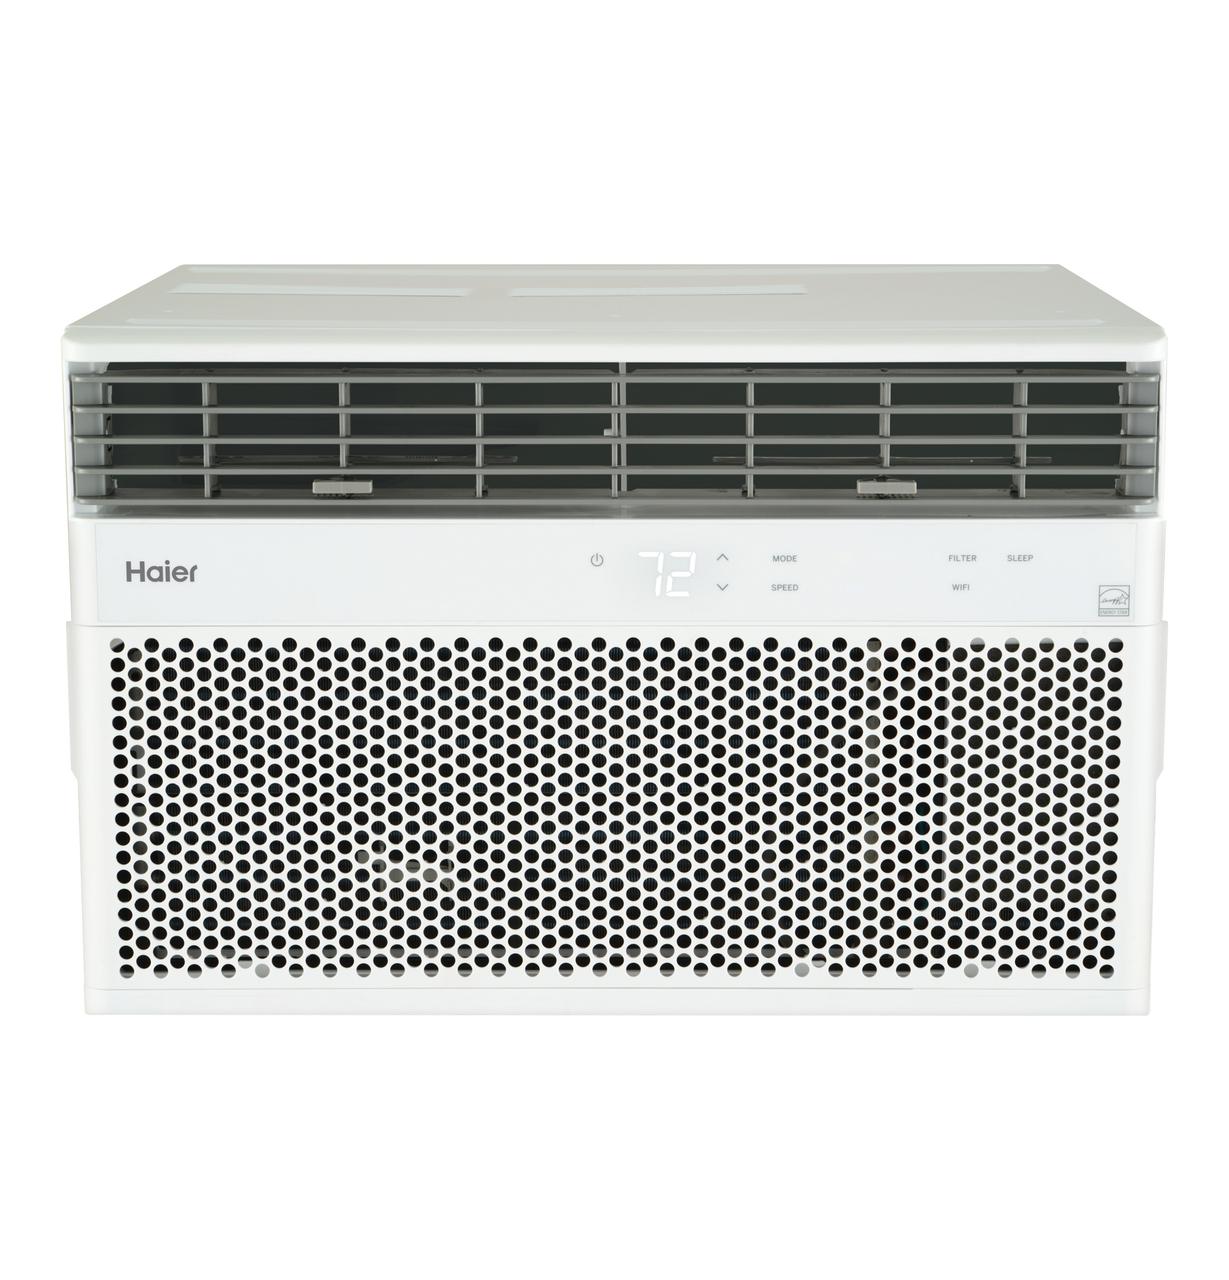 Haier QHEK12AC Haier 12,000 Btu Smart Electronic Window Air Conditioner For Large Rooms Up To 550 Sq. Ft.